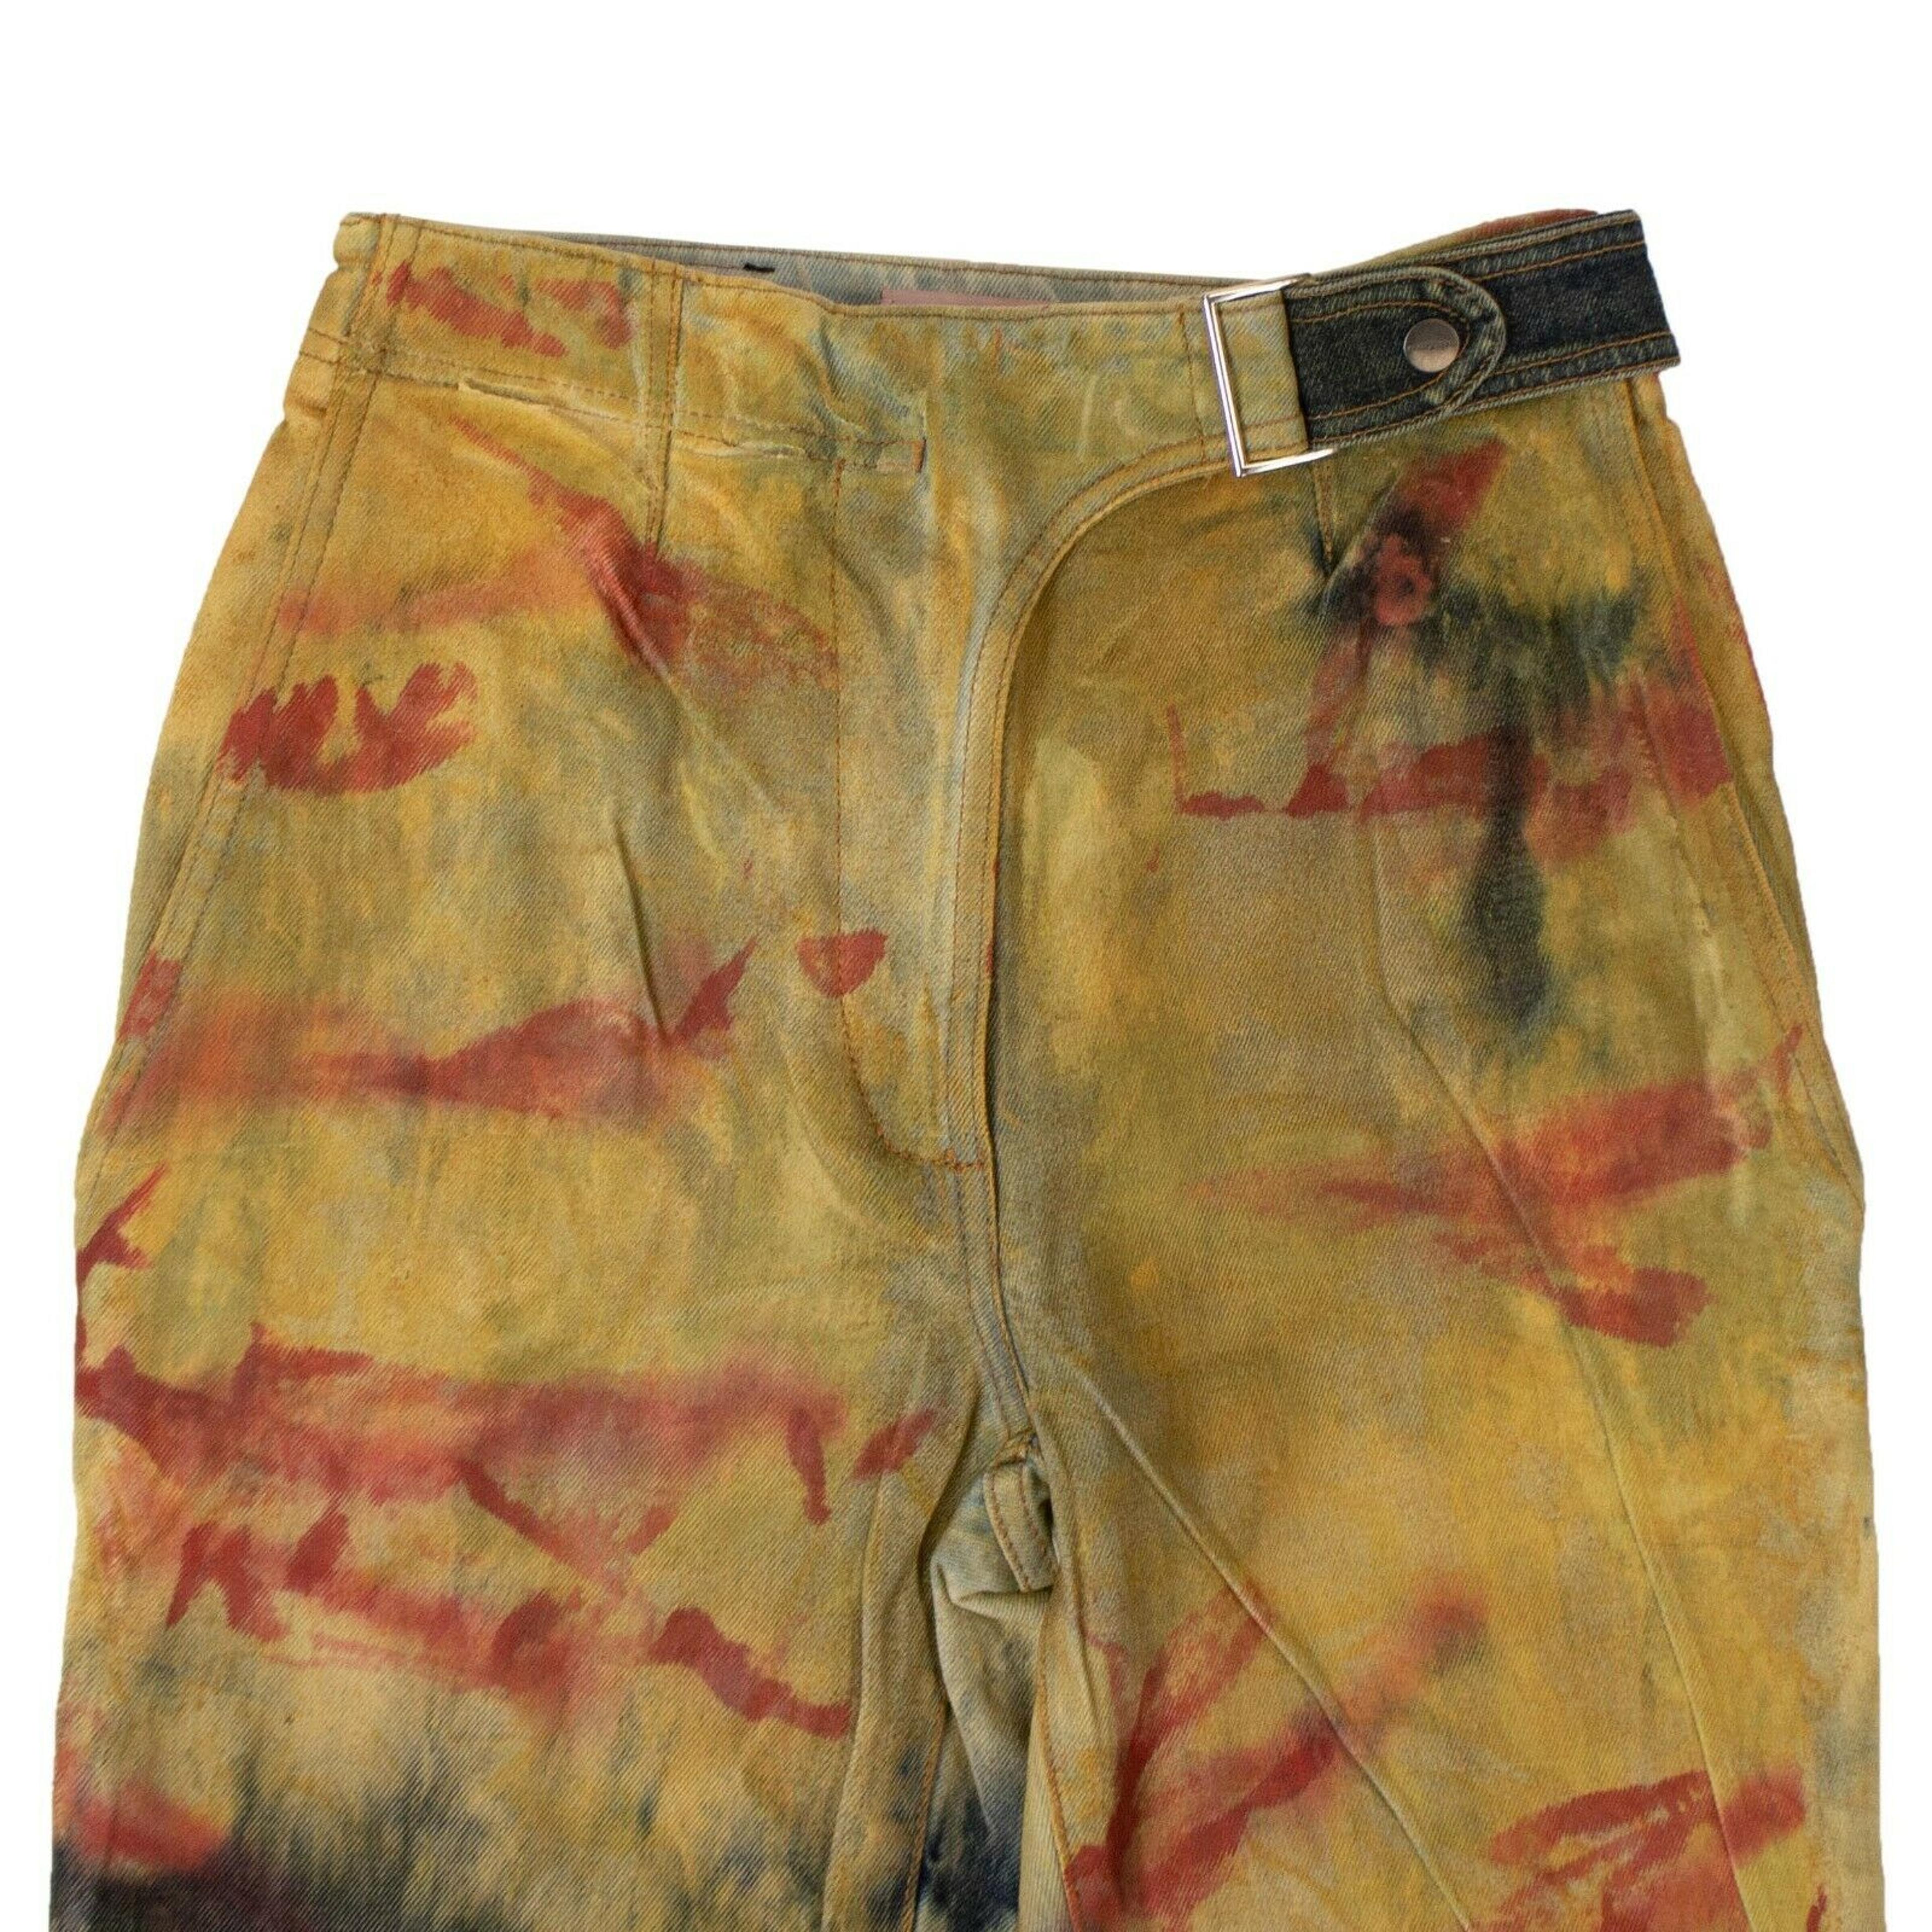 Alternate View 2 of Palm Angels Tie Dye Jeans Pants - Yellow